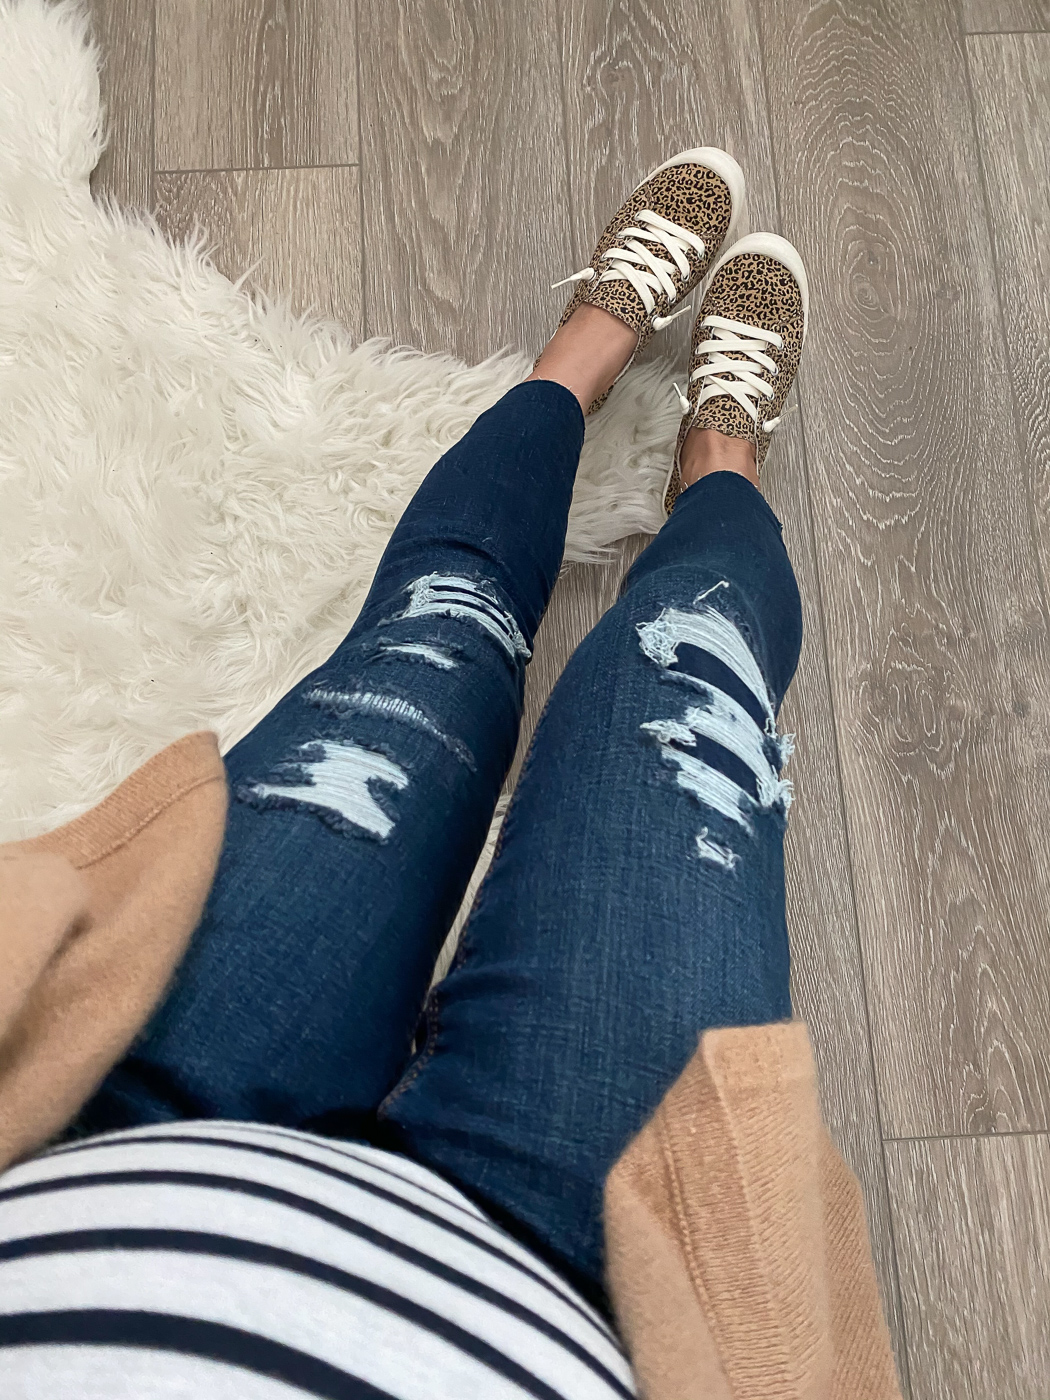 leopard sneakers distressed jeans maternity style